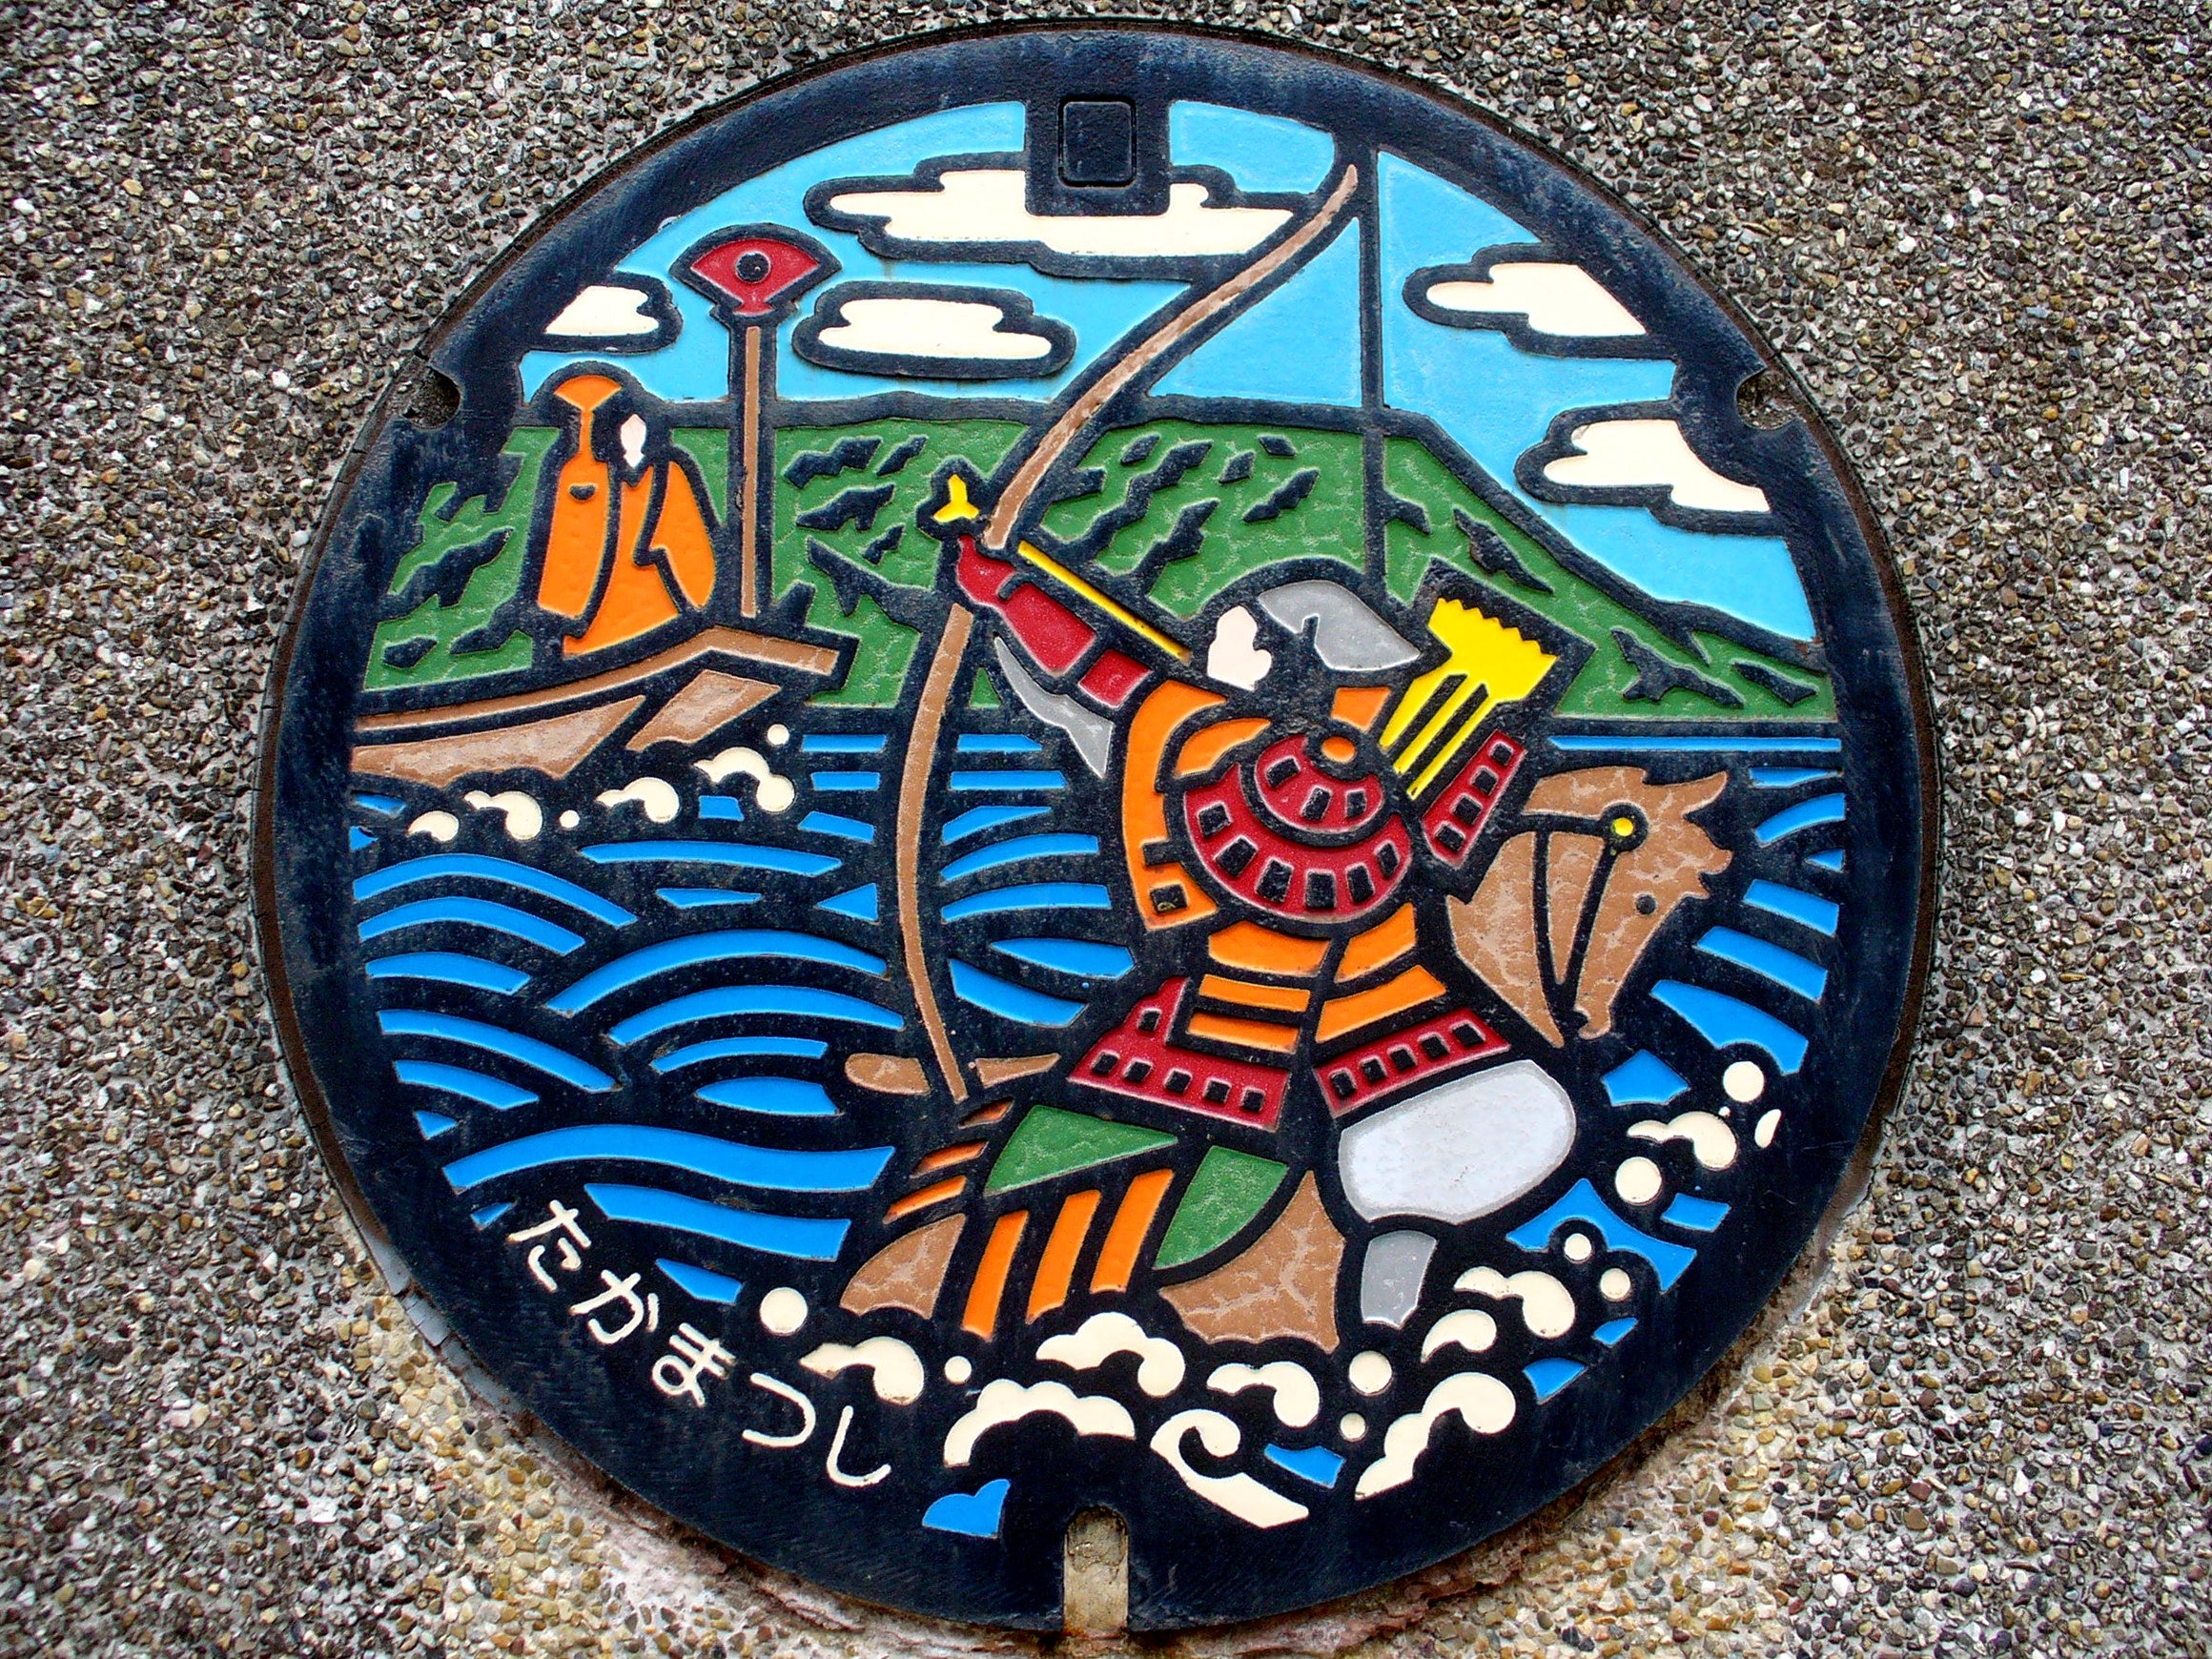 The Manhole Covers in Japan Are Absolutely Beautiful